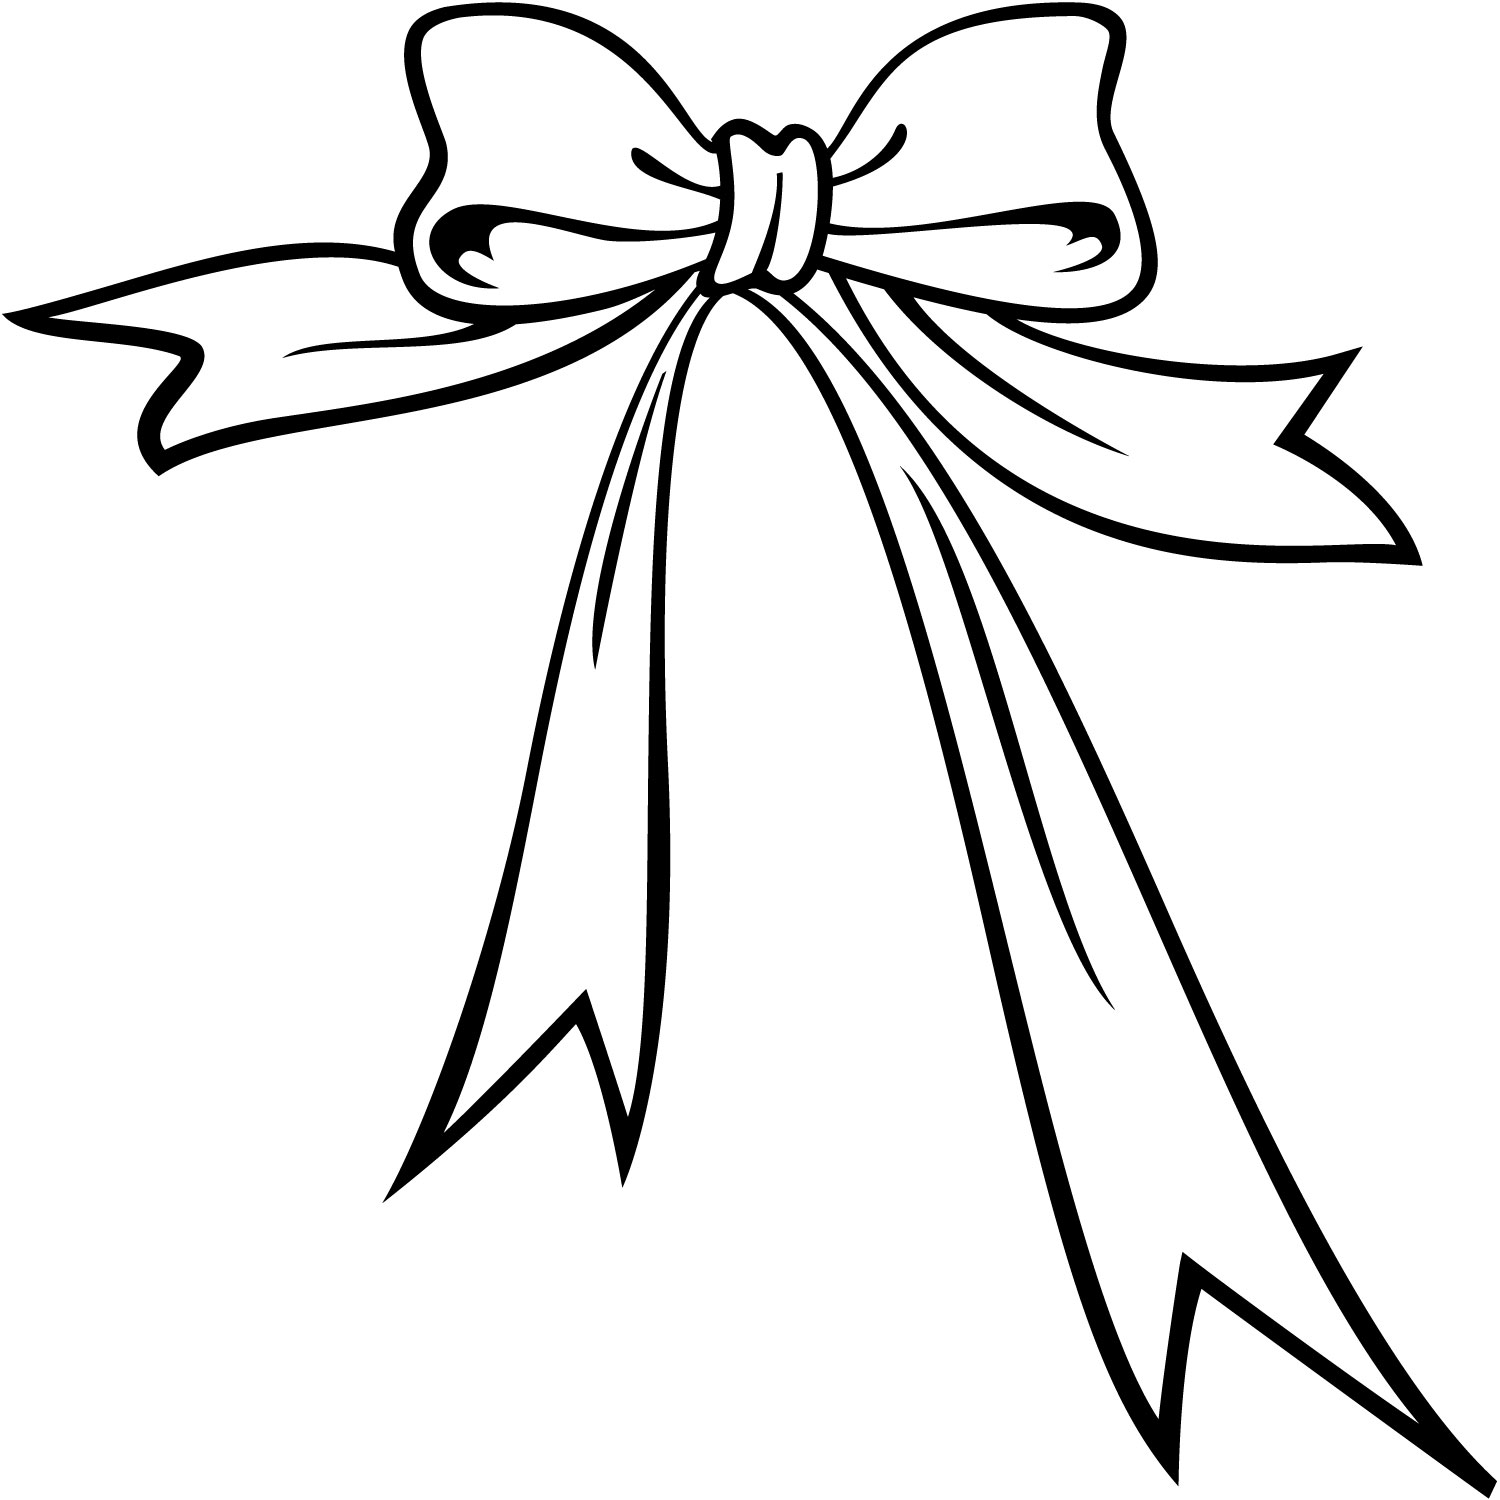 Gift bow clipart black and white